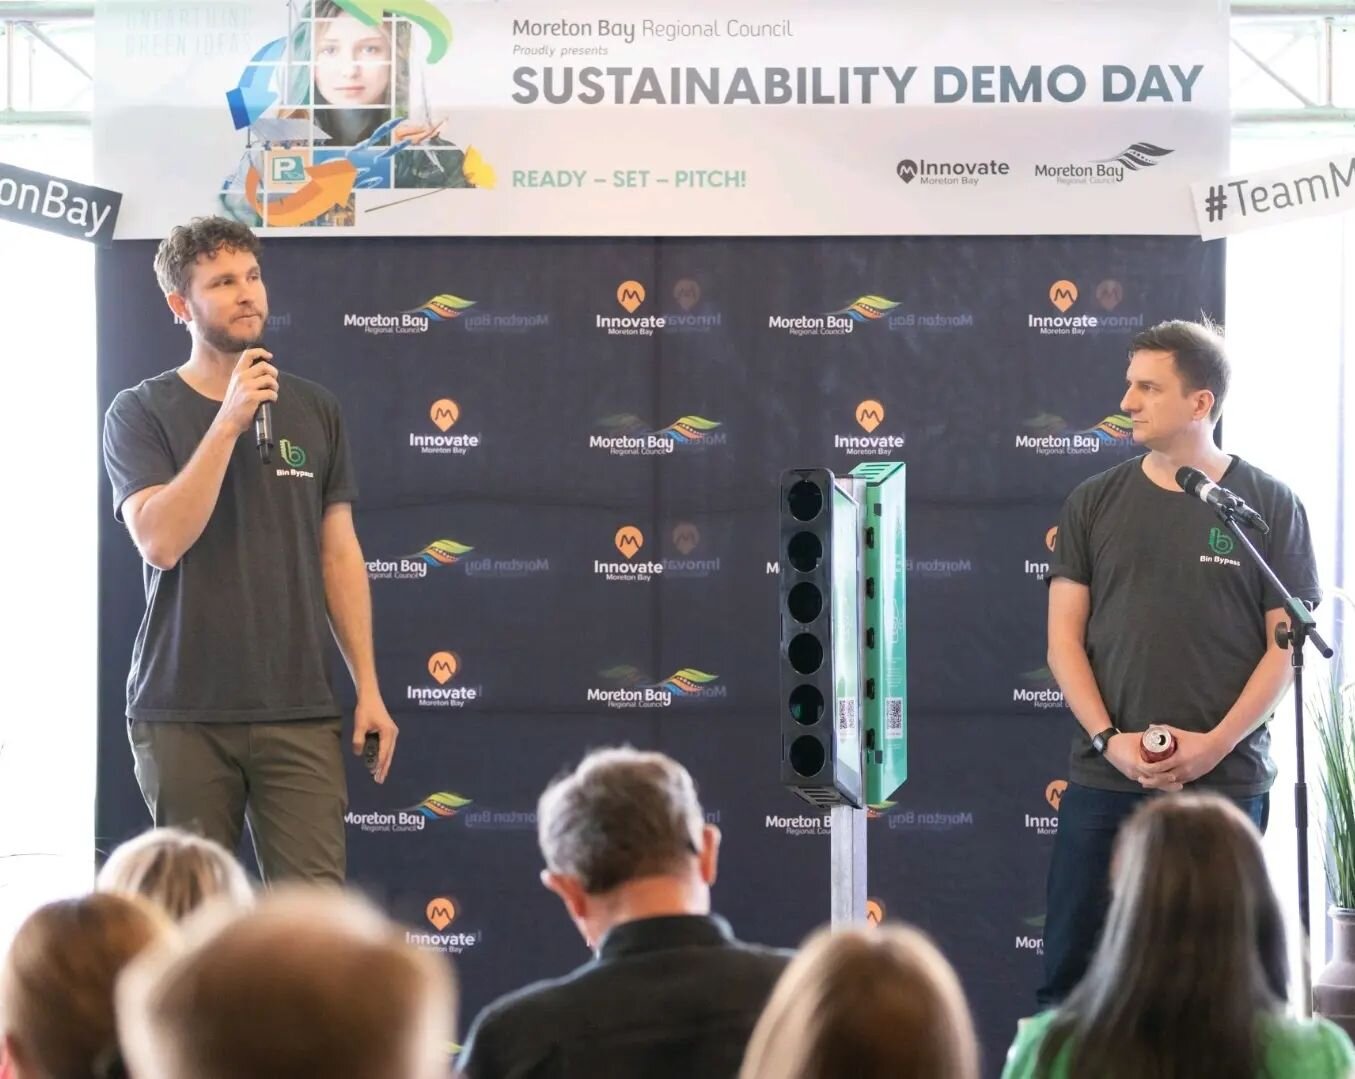 The Sustainability Demo Day by @innovatemoretonbay was inspiring to be involved in recently. A brilliant set of pitches were delivered by local Green businesses already making a big difference (with a guest appearance by Google Chrome even). 
There w